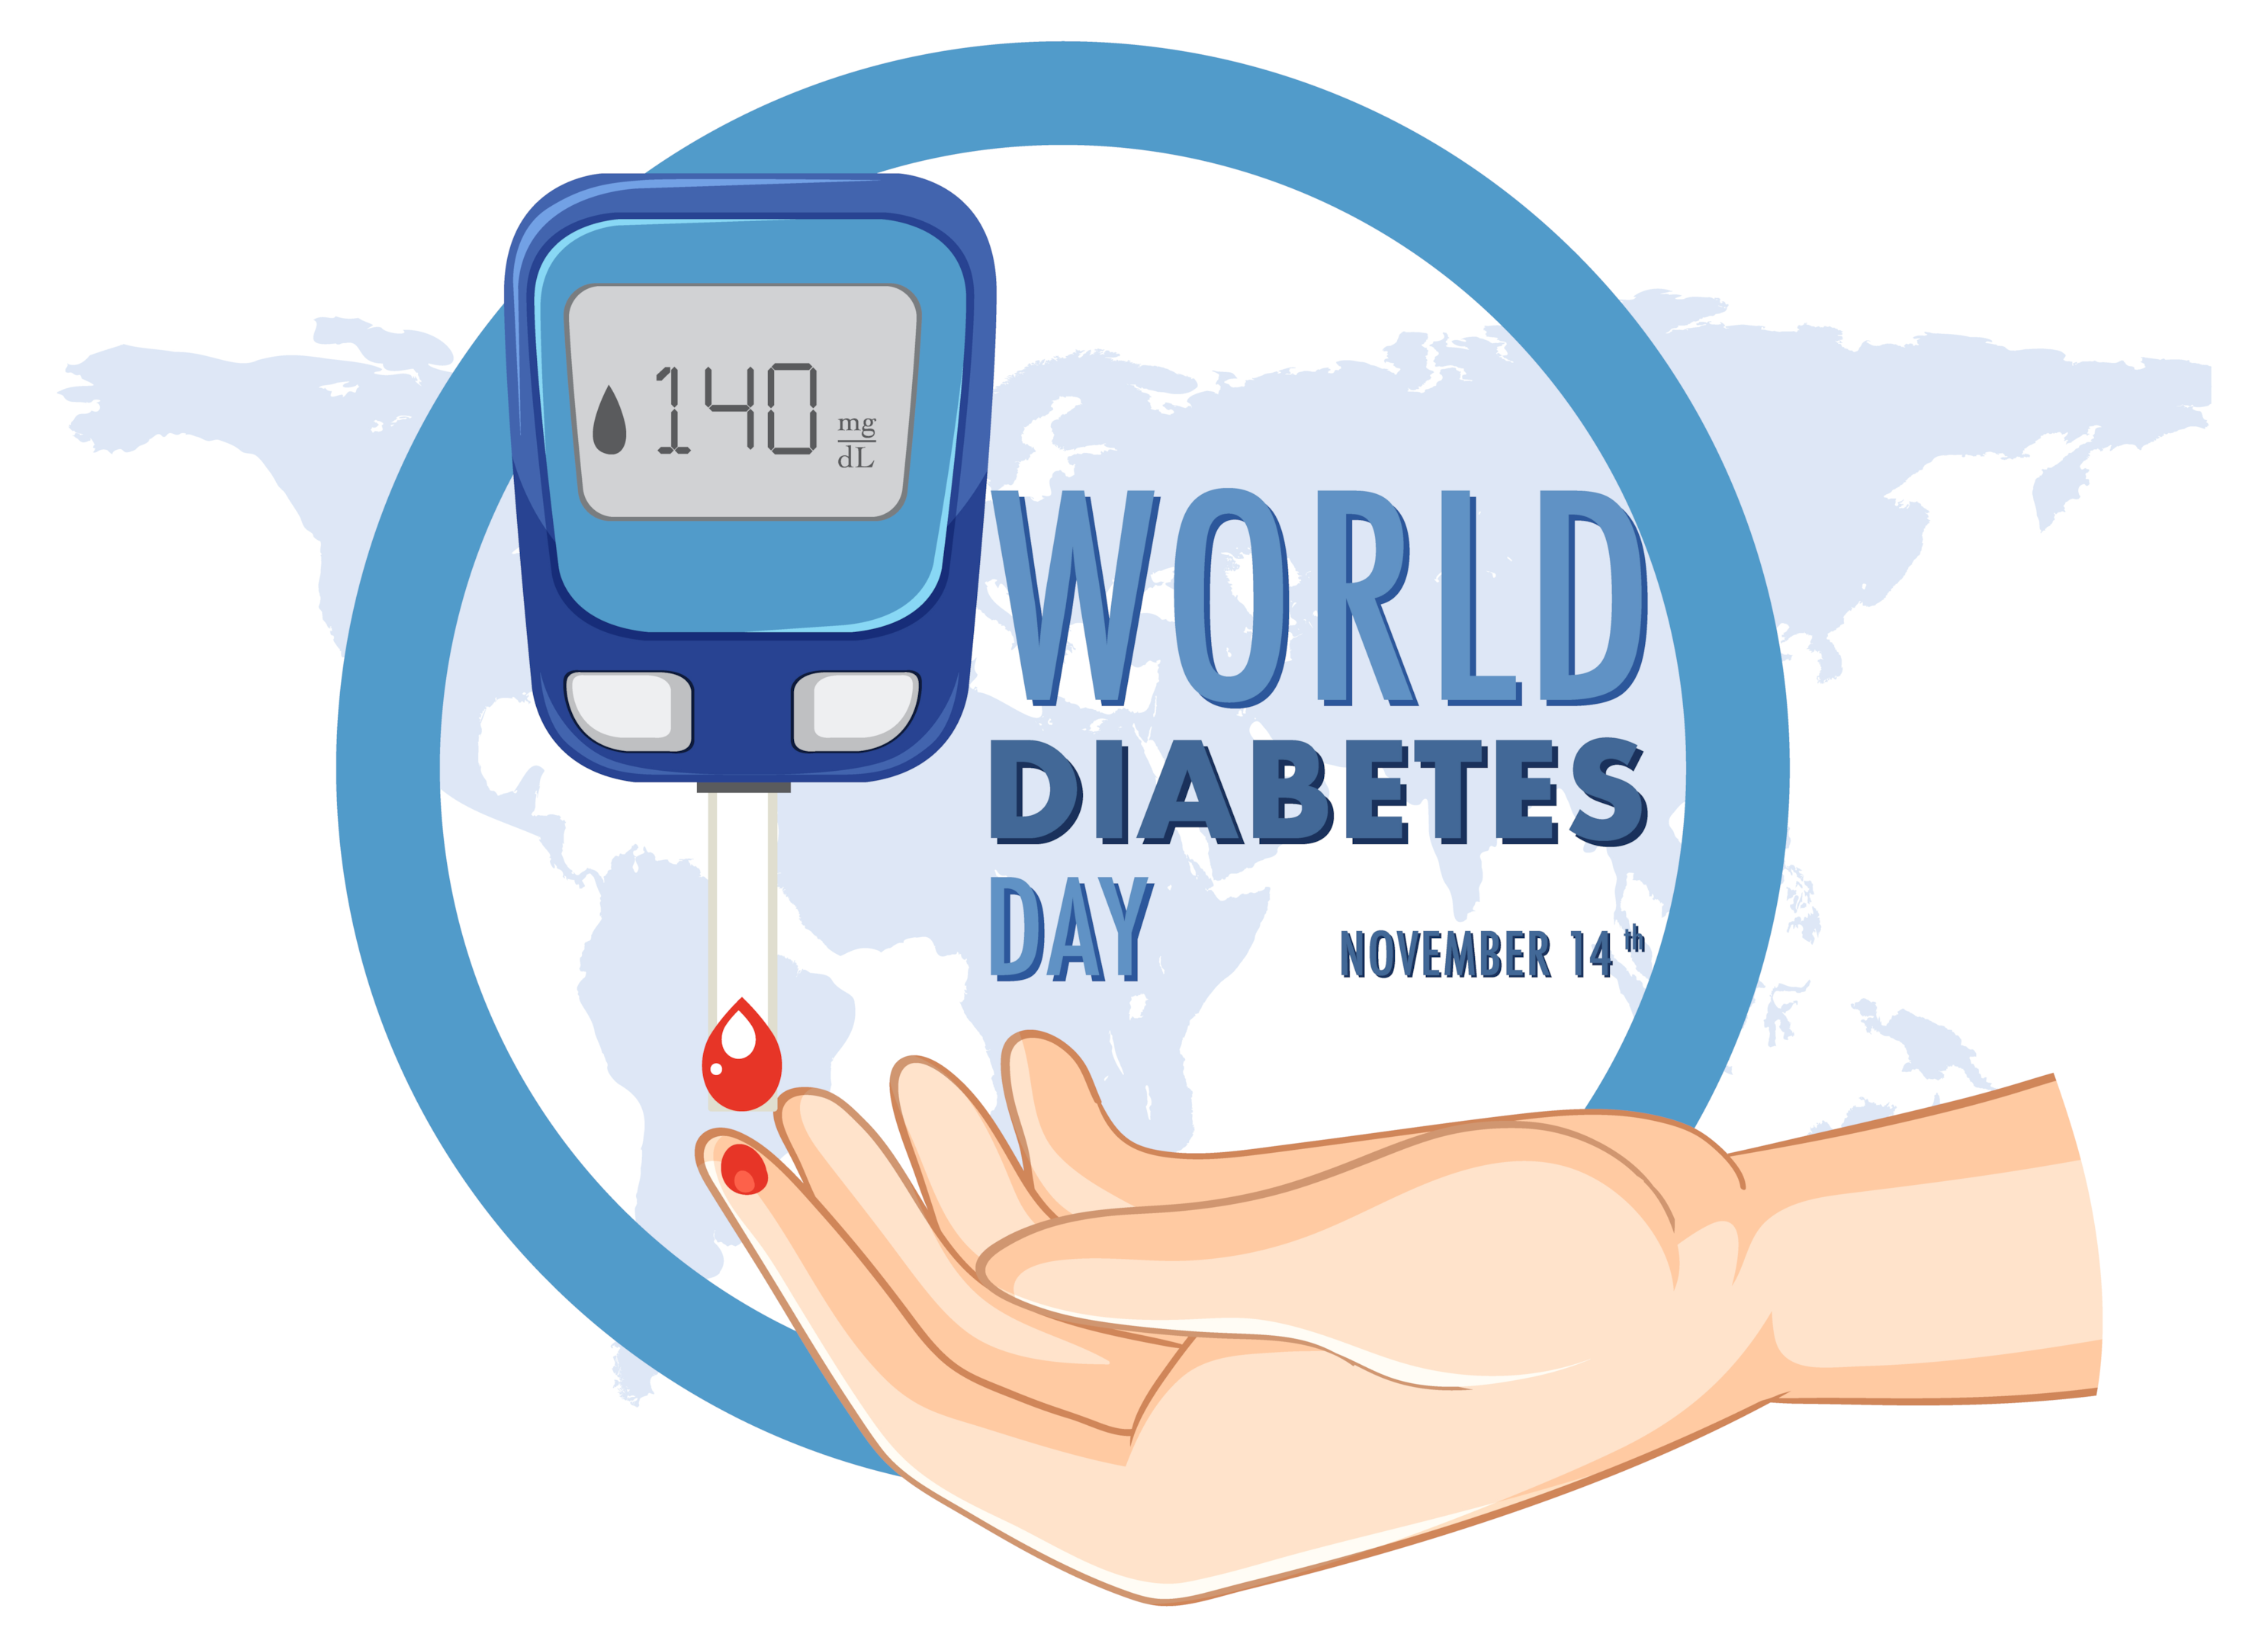 World diabetes day is celebrated on 14th November every year to create awareness about its importance.